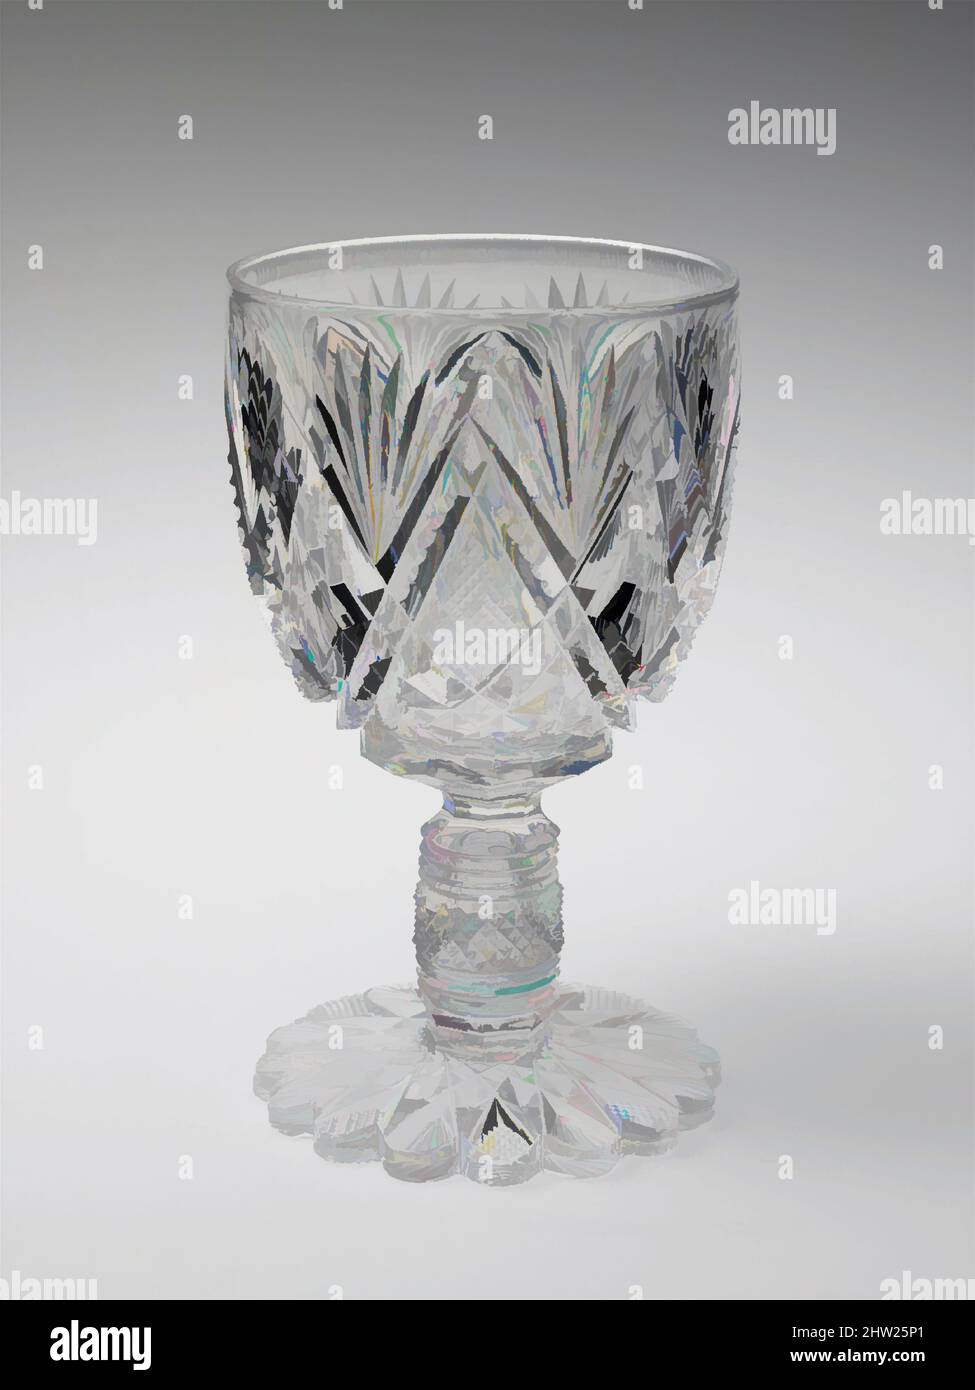 Art inspired by Goblet, ca. 1886, Made in White Mills, Pennsylvania, United States, American, Blown and cut glass, 5 1/2 in. (14 cm), Glass, C. Dorflinger and Sons (American, White Mills, Pennsylviania, 1881–1921), The glass factories founded by Alsatian émigré Christian Dorflinger, Classic works modernized by Artotop with a splash of modernity. Shapes, color and value, eye-catching visual impact on art. Emotions through freedom of artworks in a contemporary way. A timeless message pursuing a wildly creative new direction. Artists turning to the digital medium and creating the Artotop NFT Stock Photo